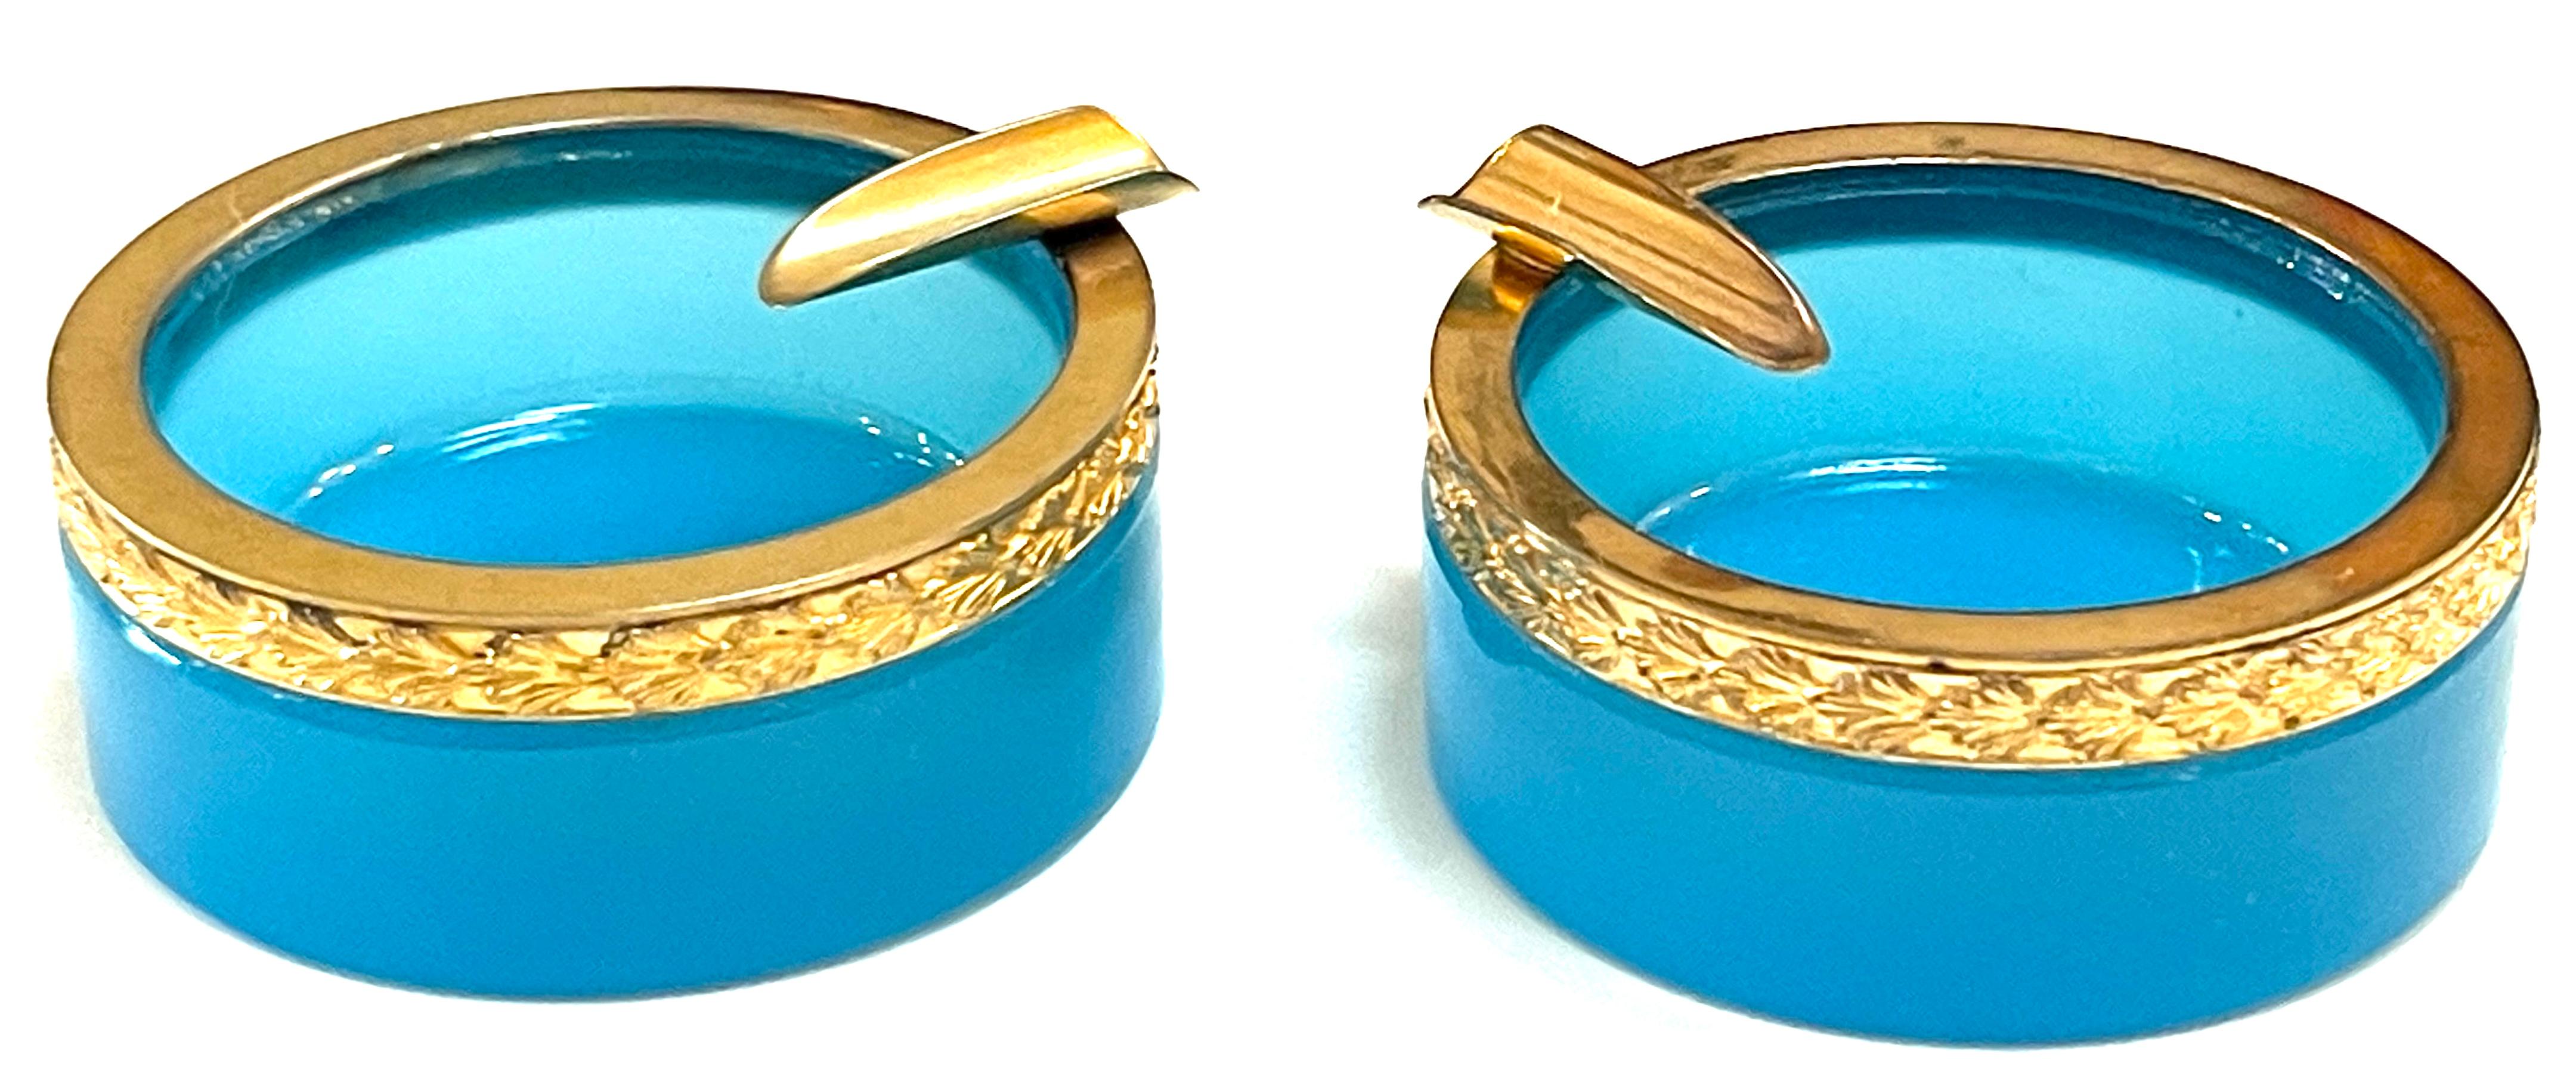 Pair of Italian Neoclassic Ormolu and Blue Opaline Diminutive Ashtrays/Portacenere
Italy, circa 1950s

A luxurious pair of Italian Neoclassic Ormolu and Blue Opaline Diminutive Ashtrays/Portacenere. Crafted with indulgence in mind, each ashtray